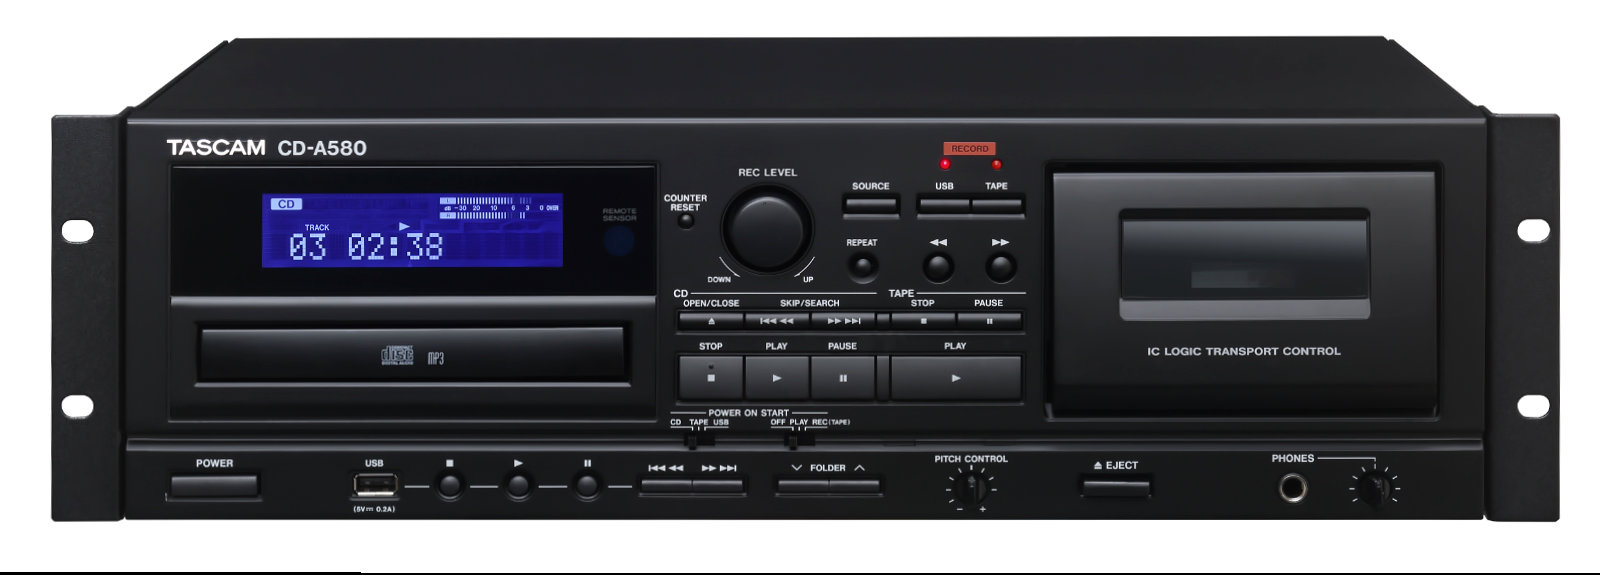 Tascam Cd A580 Cd Player Cassette Deck Usb Recorder pertaining to dimensions 1600 X 575